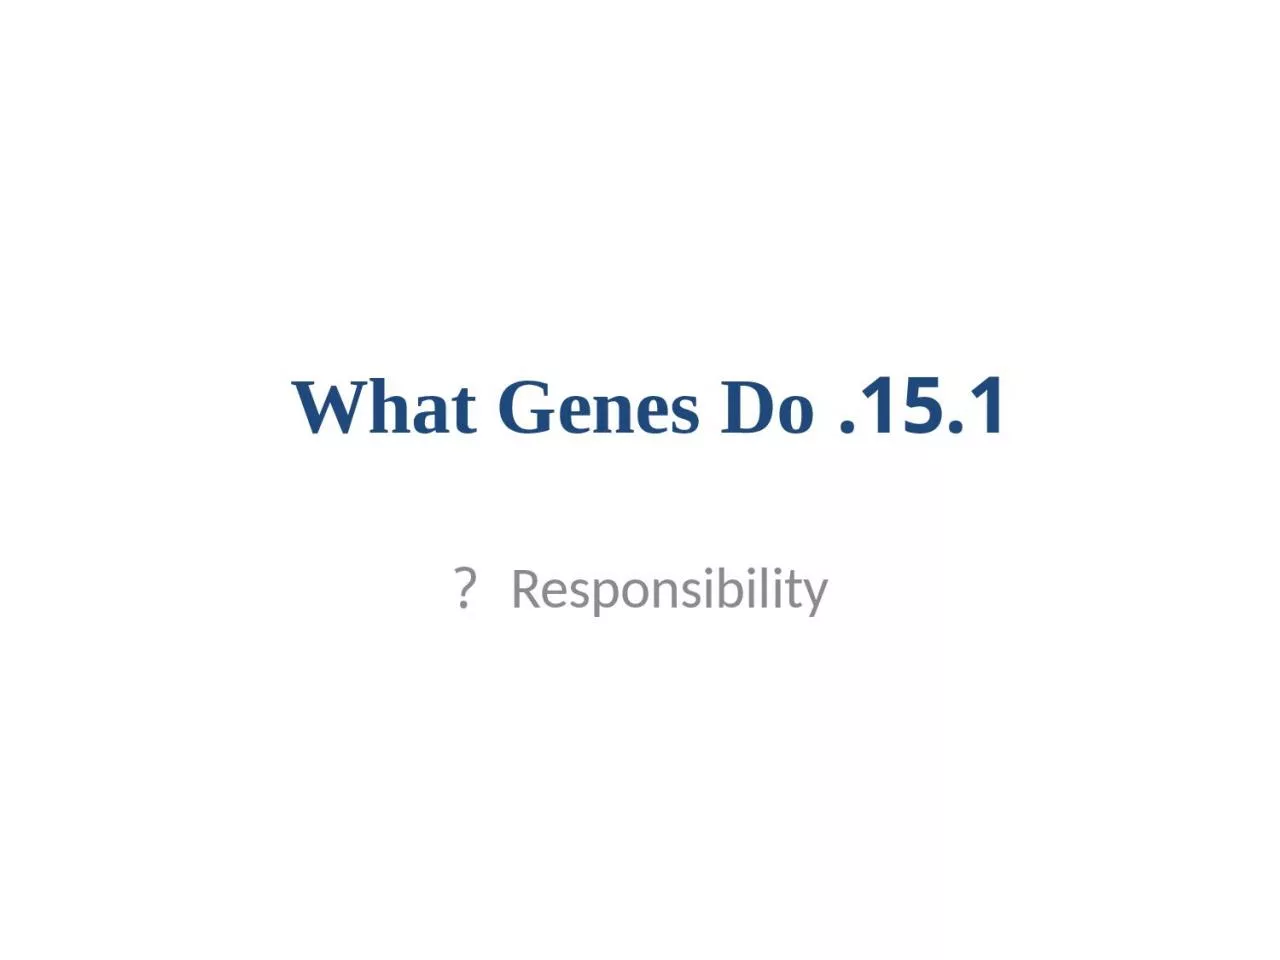 15.1. What Genes Do  Responsibility  ?